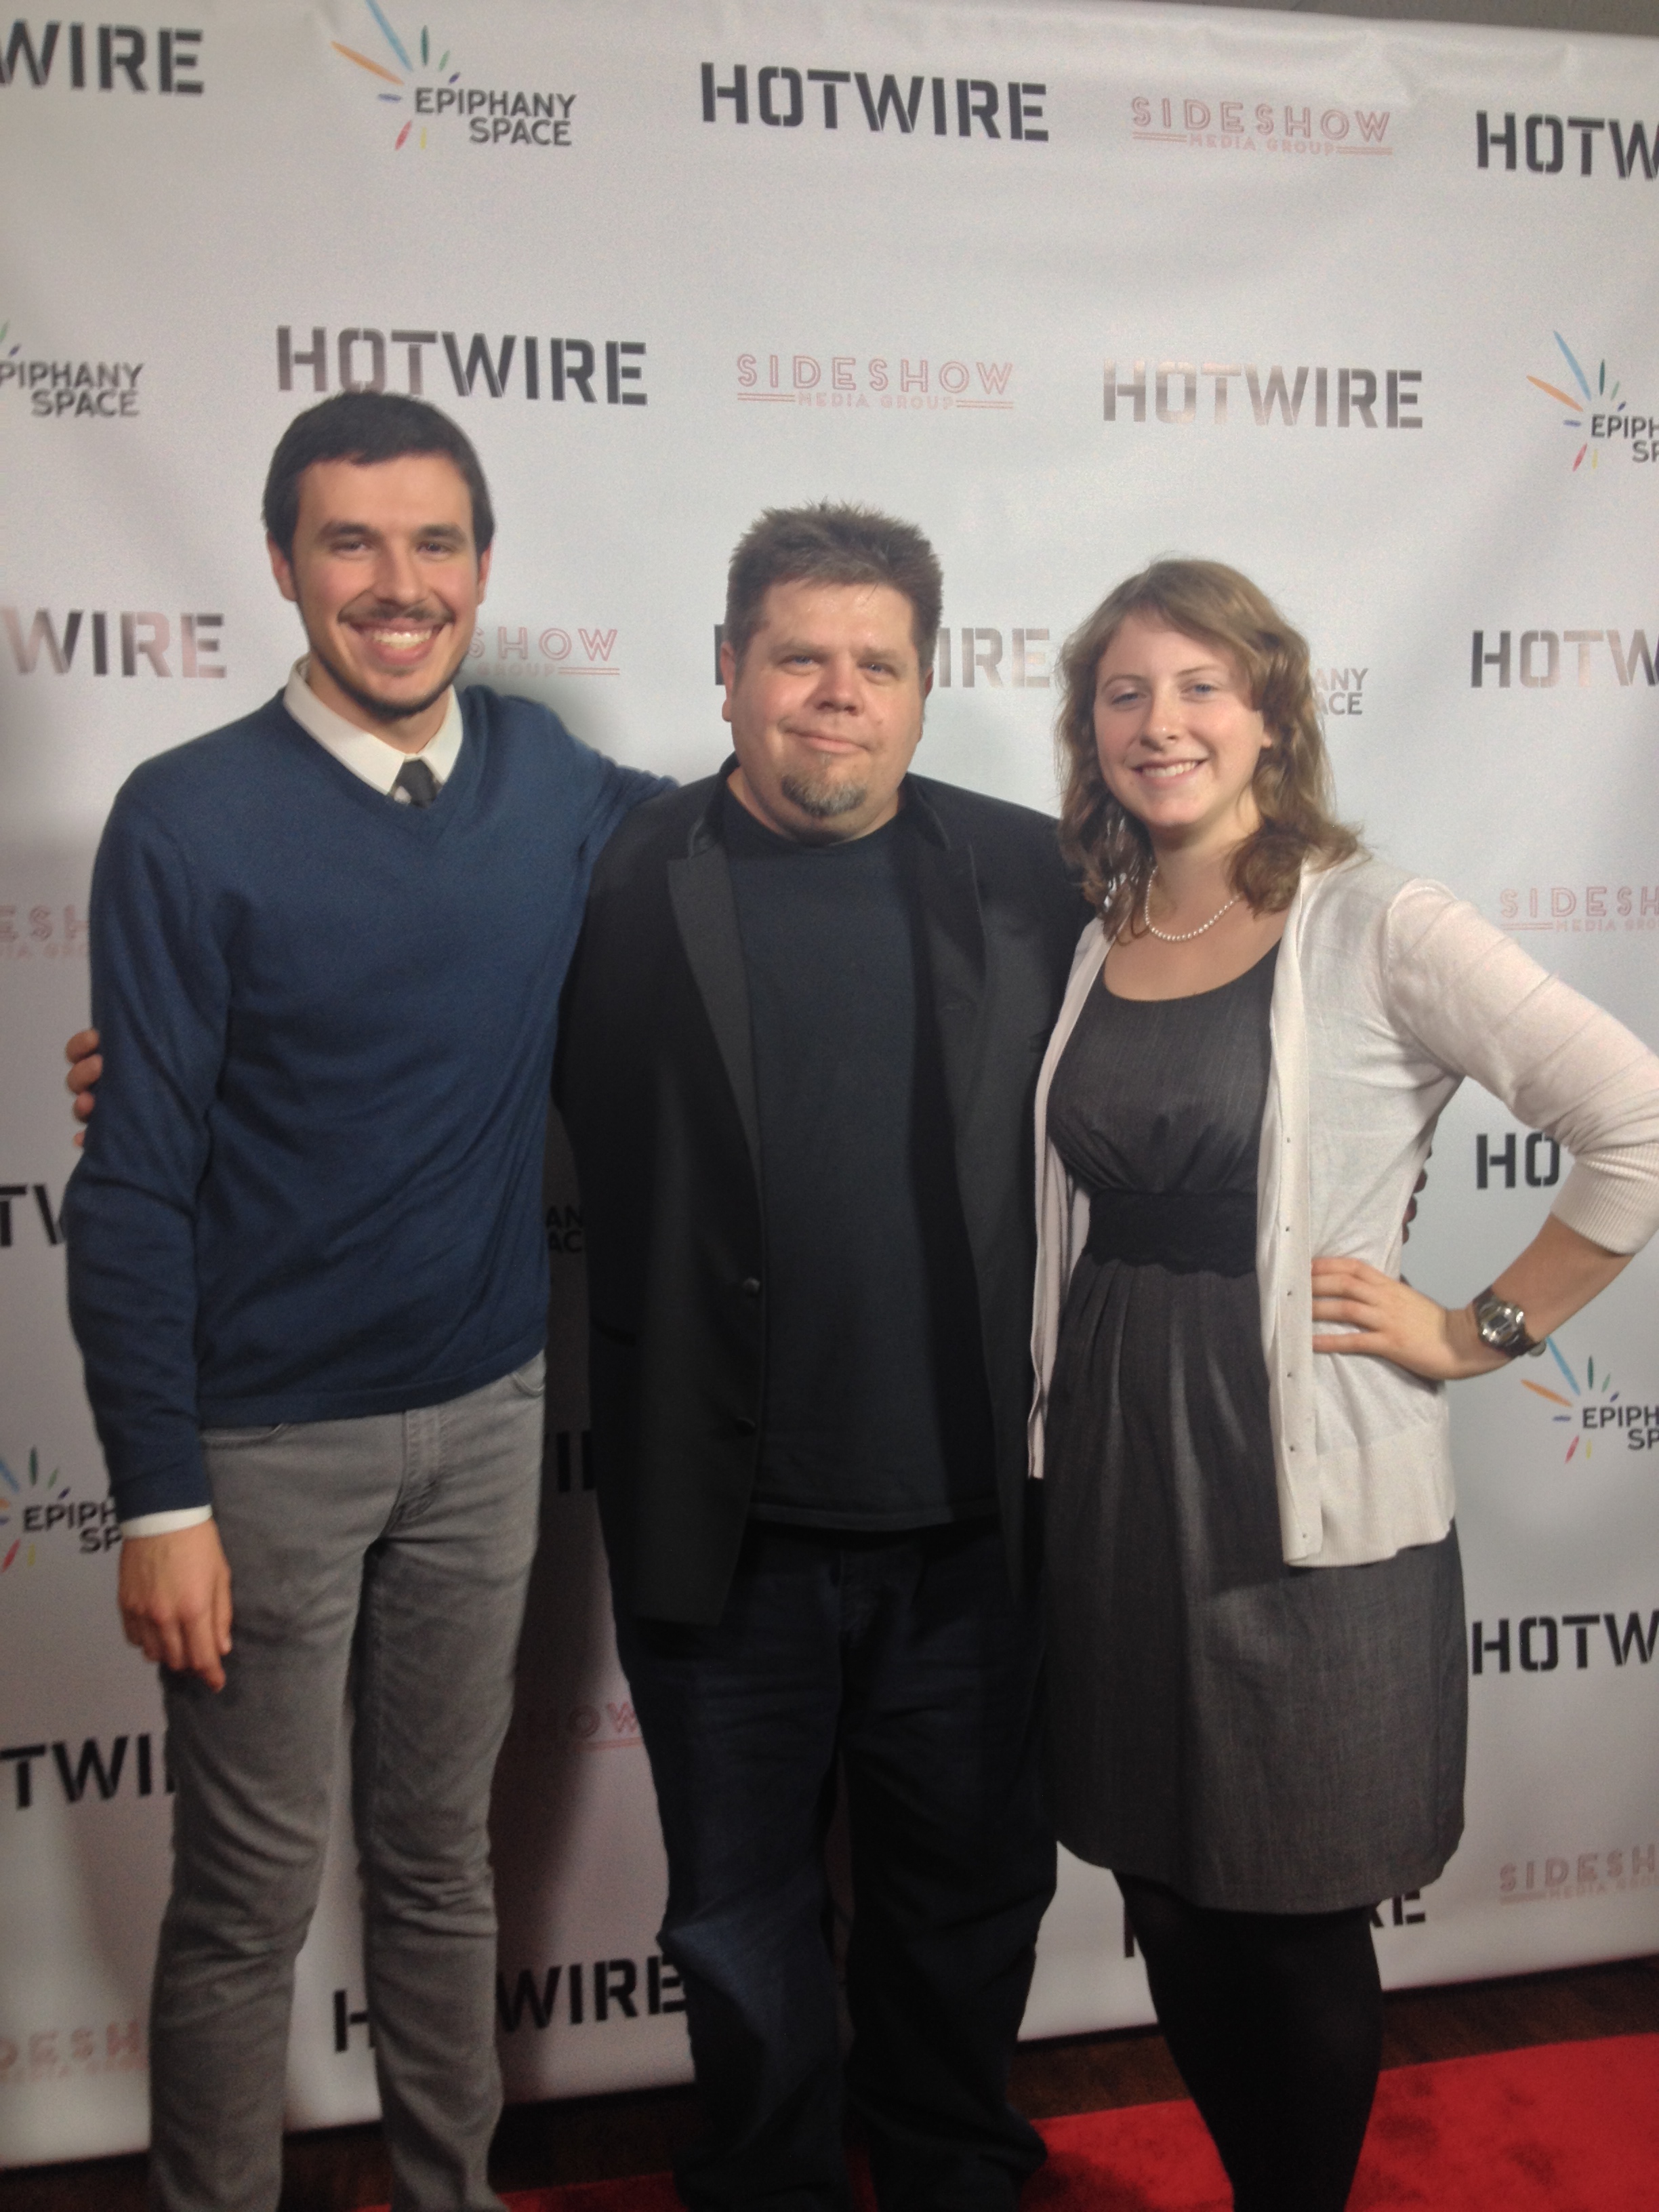 Hotwire Friends and Family Screening